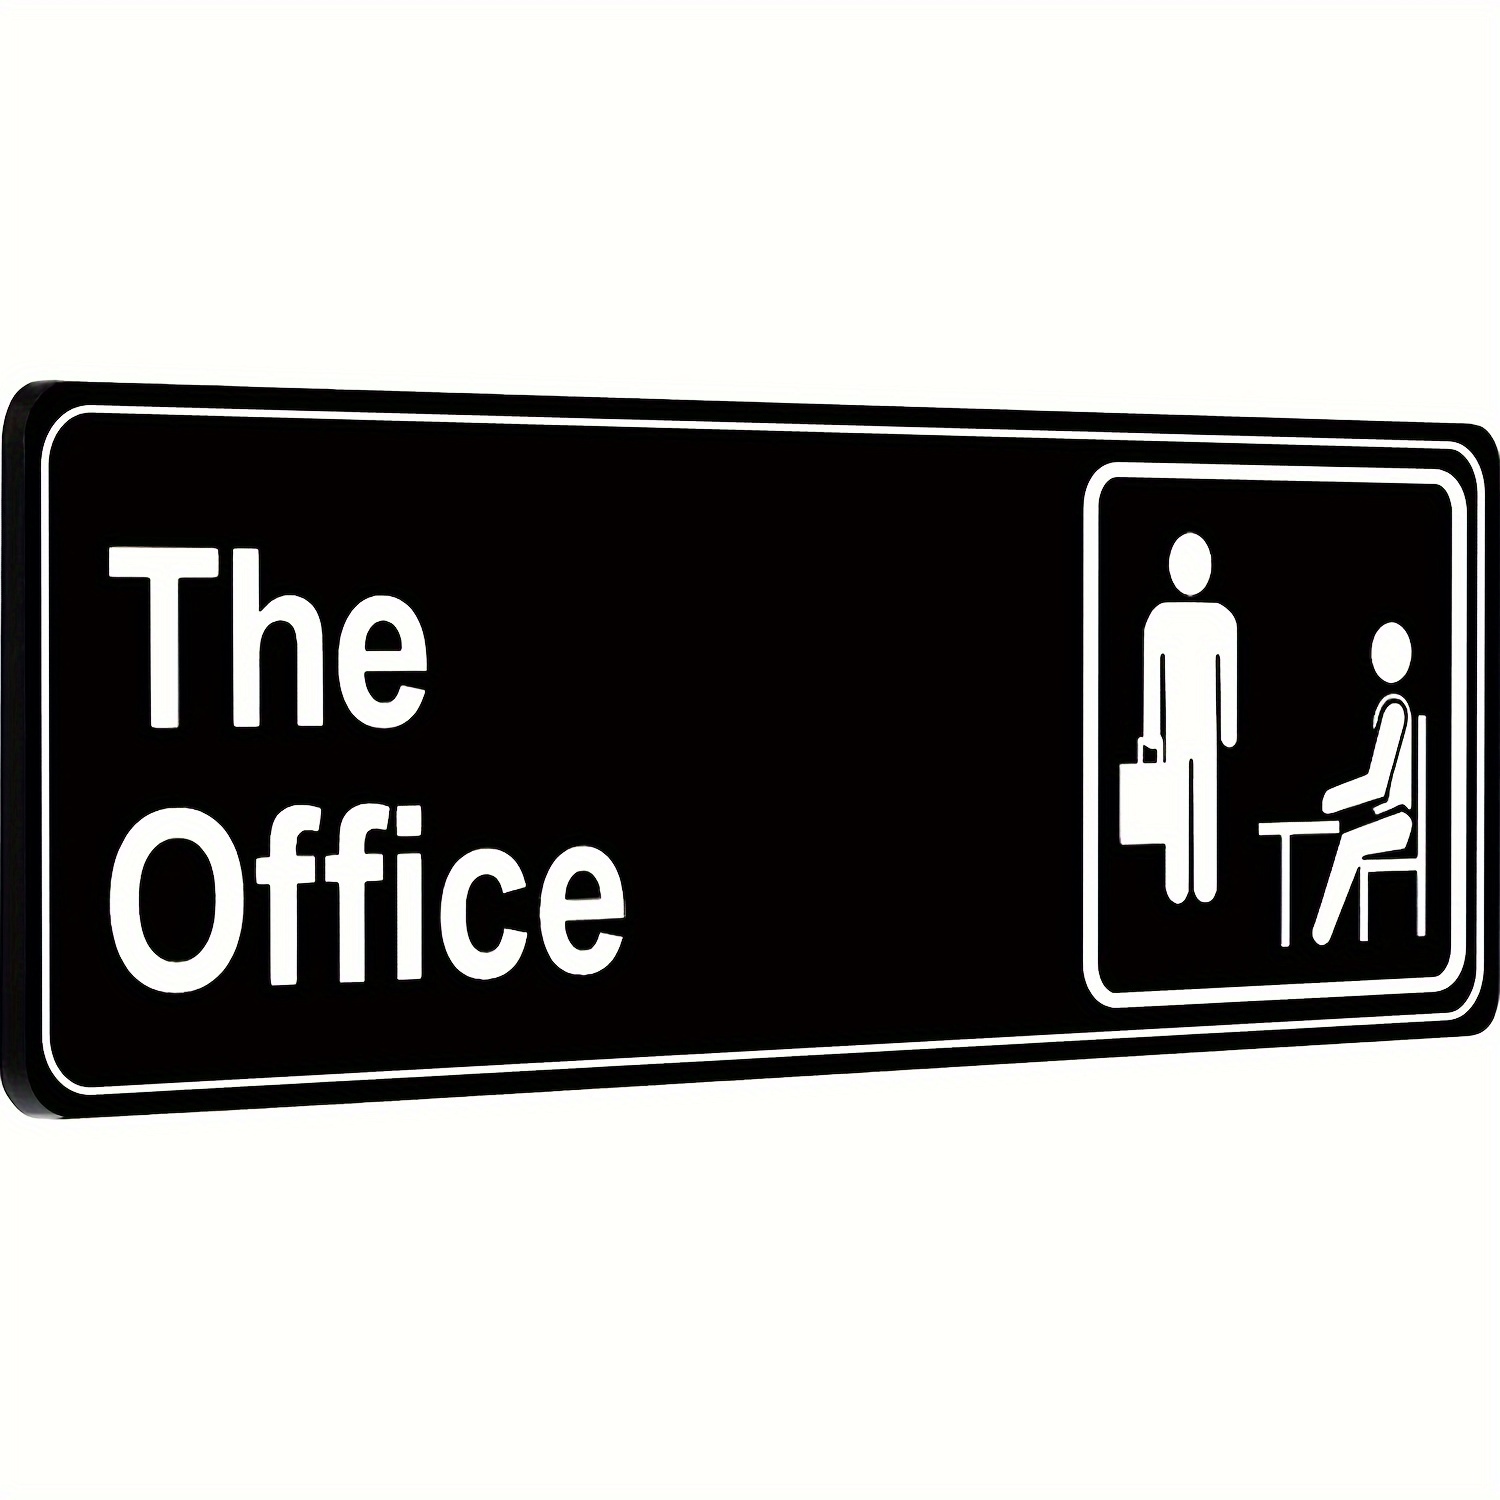 

1pc The Office Sign, Main Official Self Adhesive Sign For Door Or Wall 9 X 3 Inch Quick And Easy Installation Premium Acrylic Design For Your Home Office/business